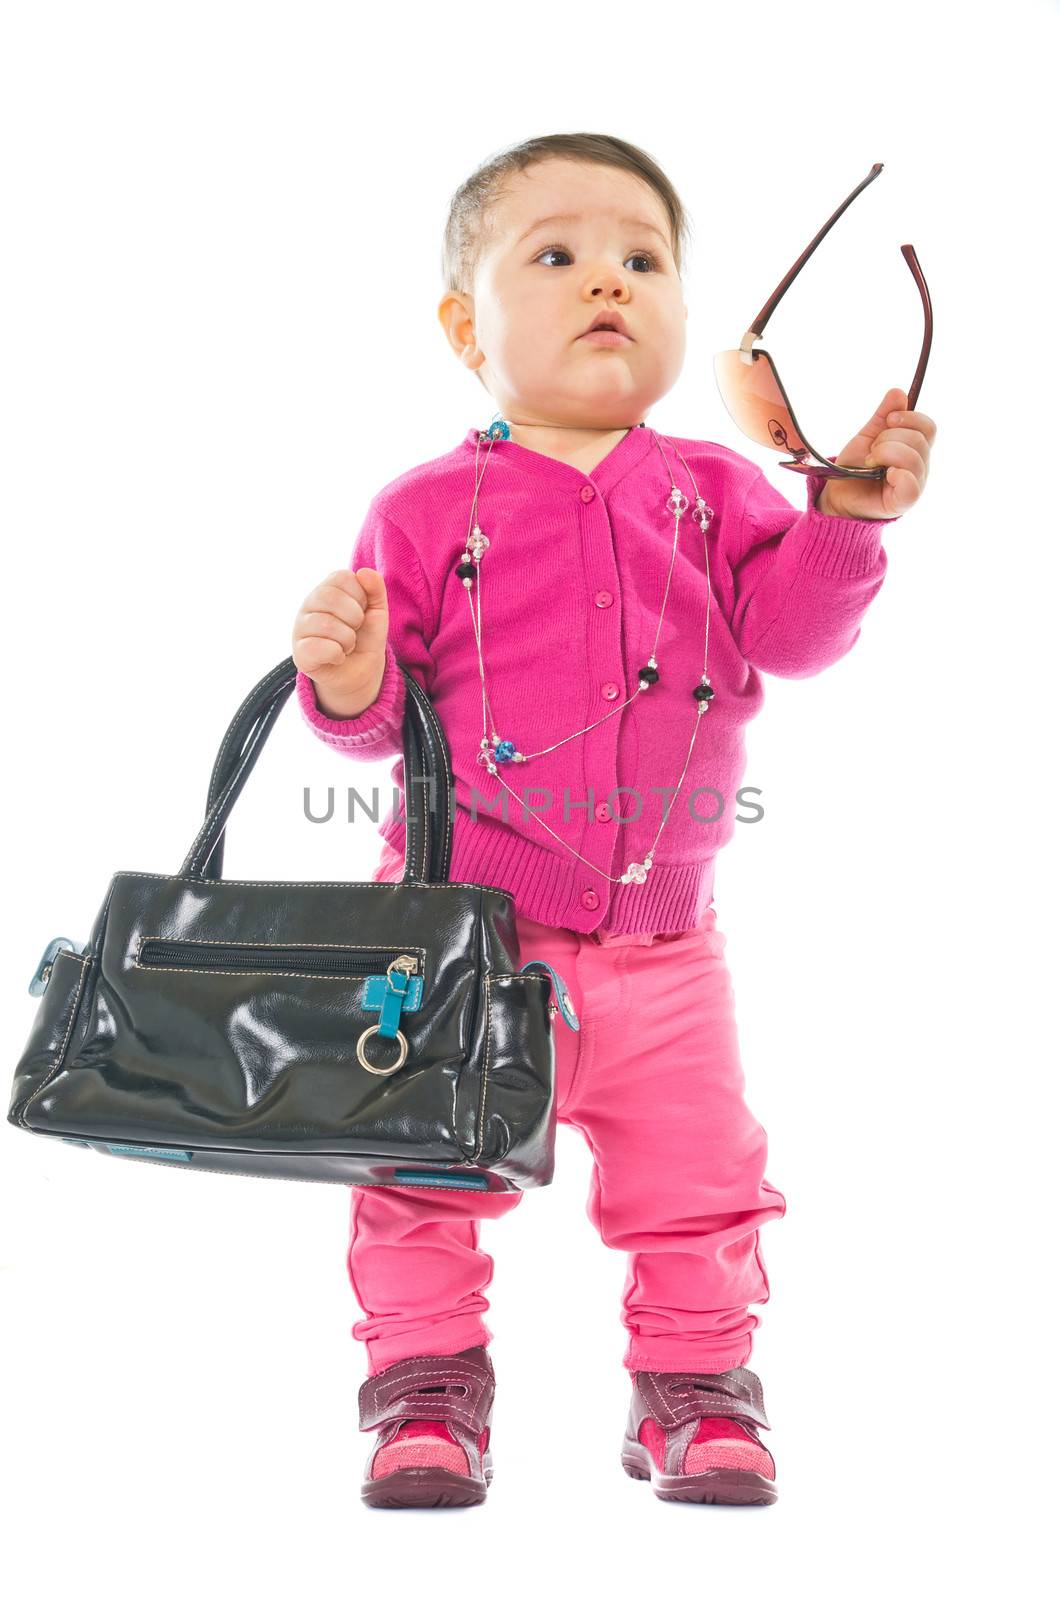 Baby in pink with sunglasses and hand bag isolated on white